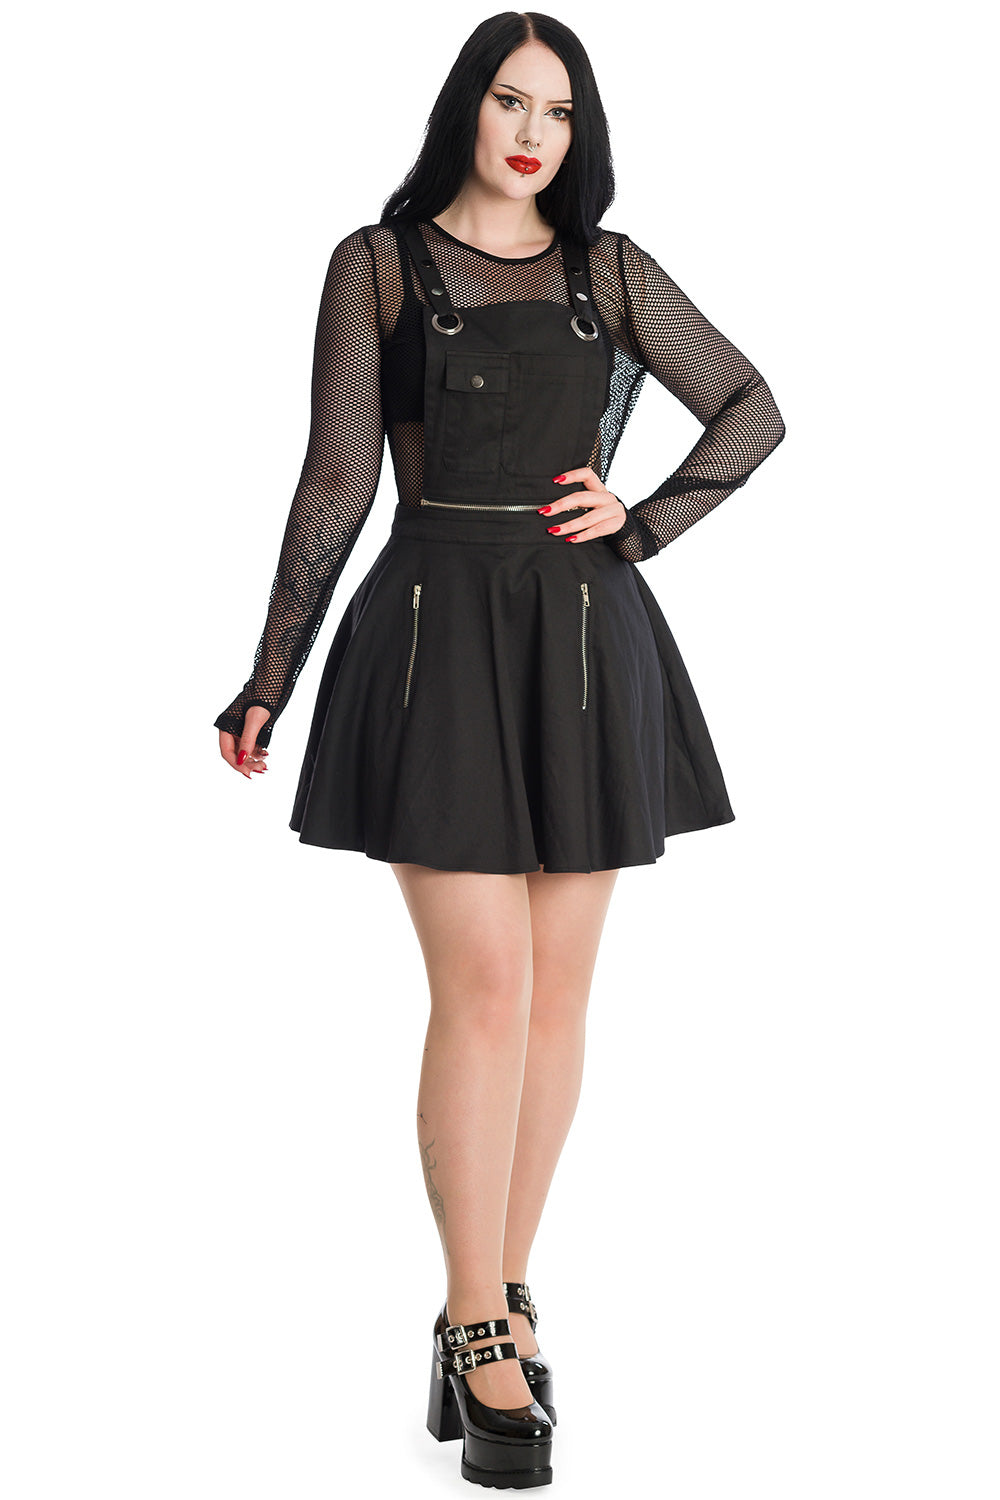 Gothic model in black pinafore dress with mesh long sleeve top